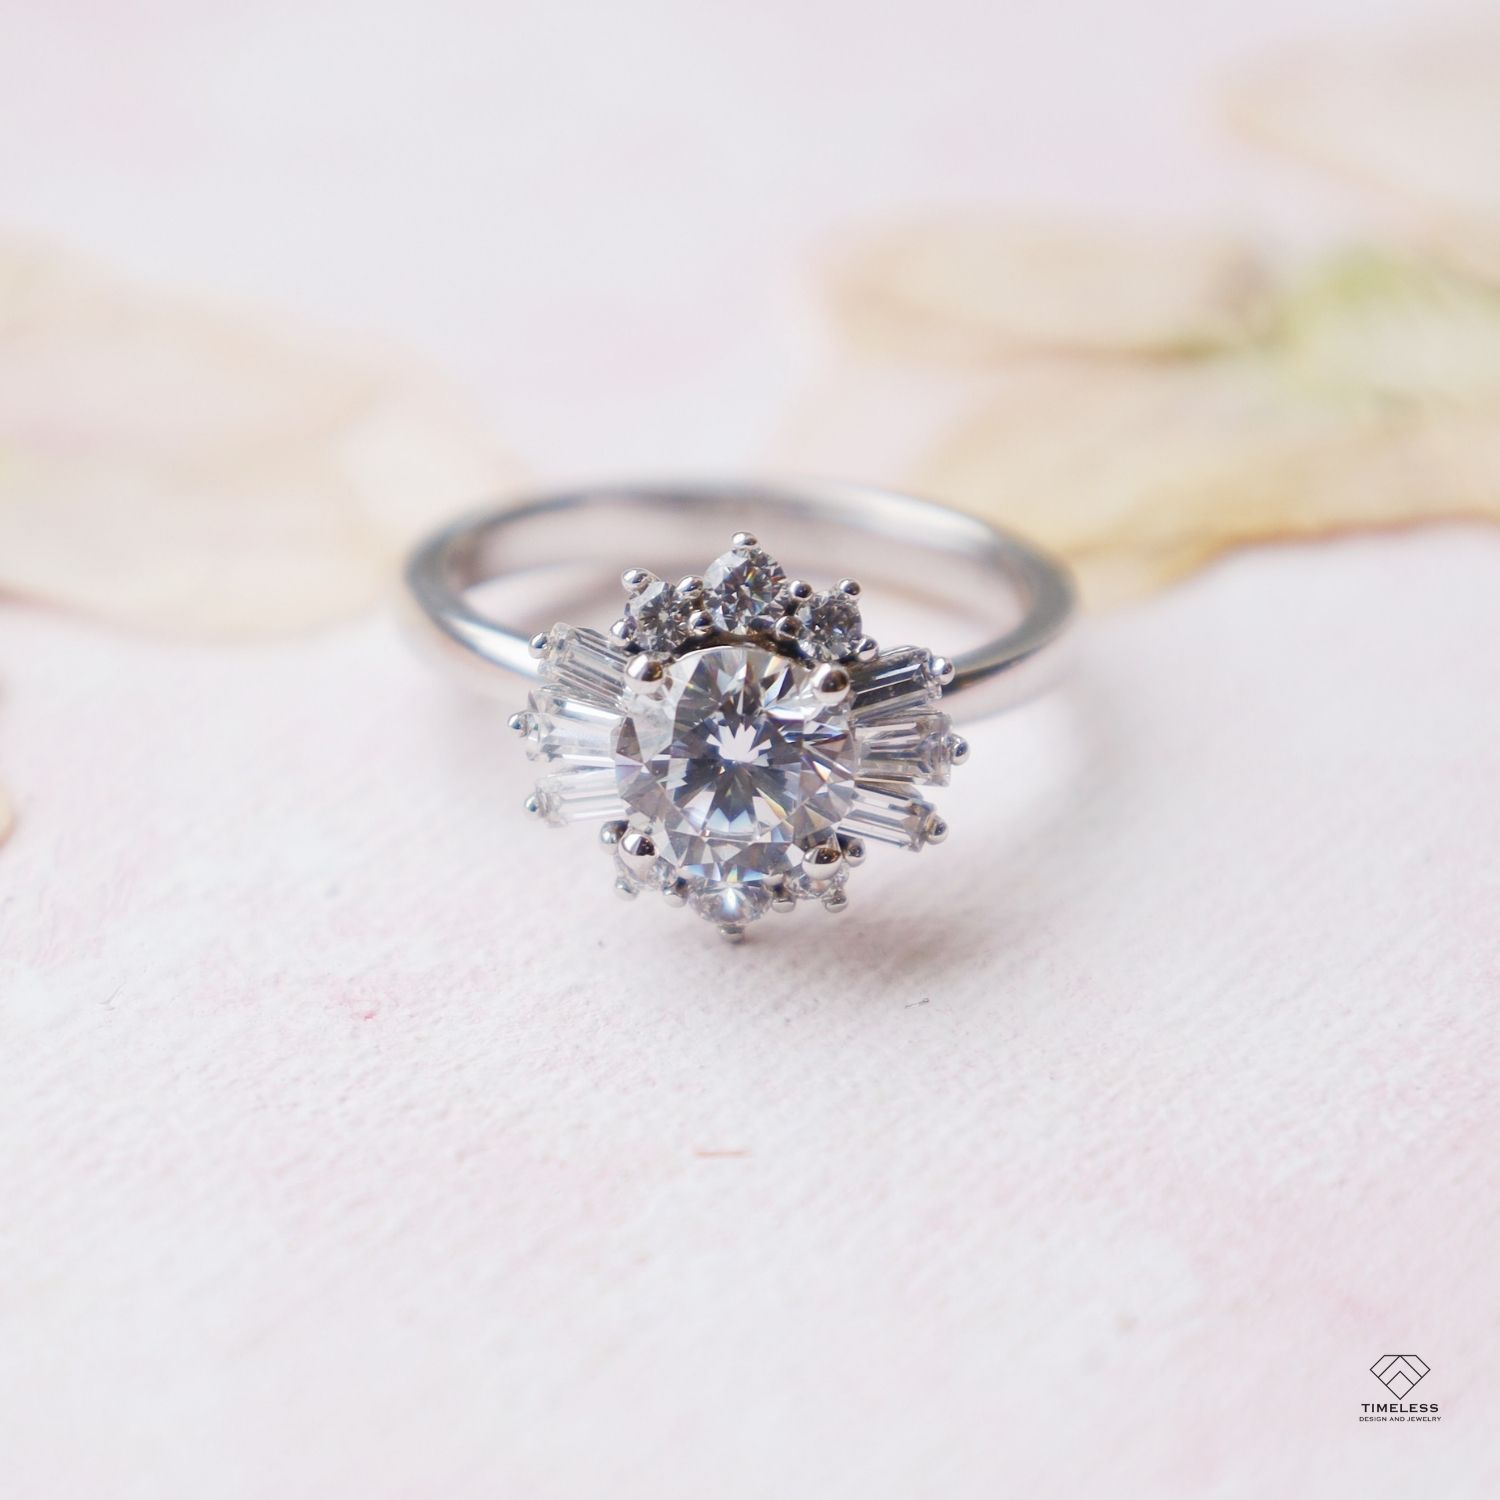 Custom Round Cut Diamond & Accent Diamonds Engagement Ring in Salt Lake City by Timeless Design and Jewelry